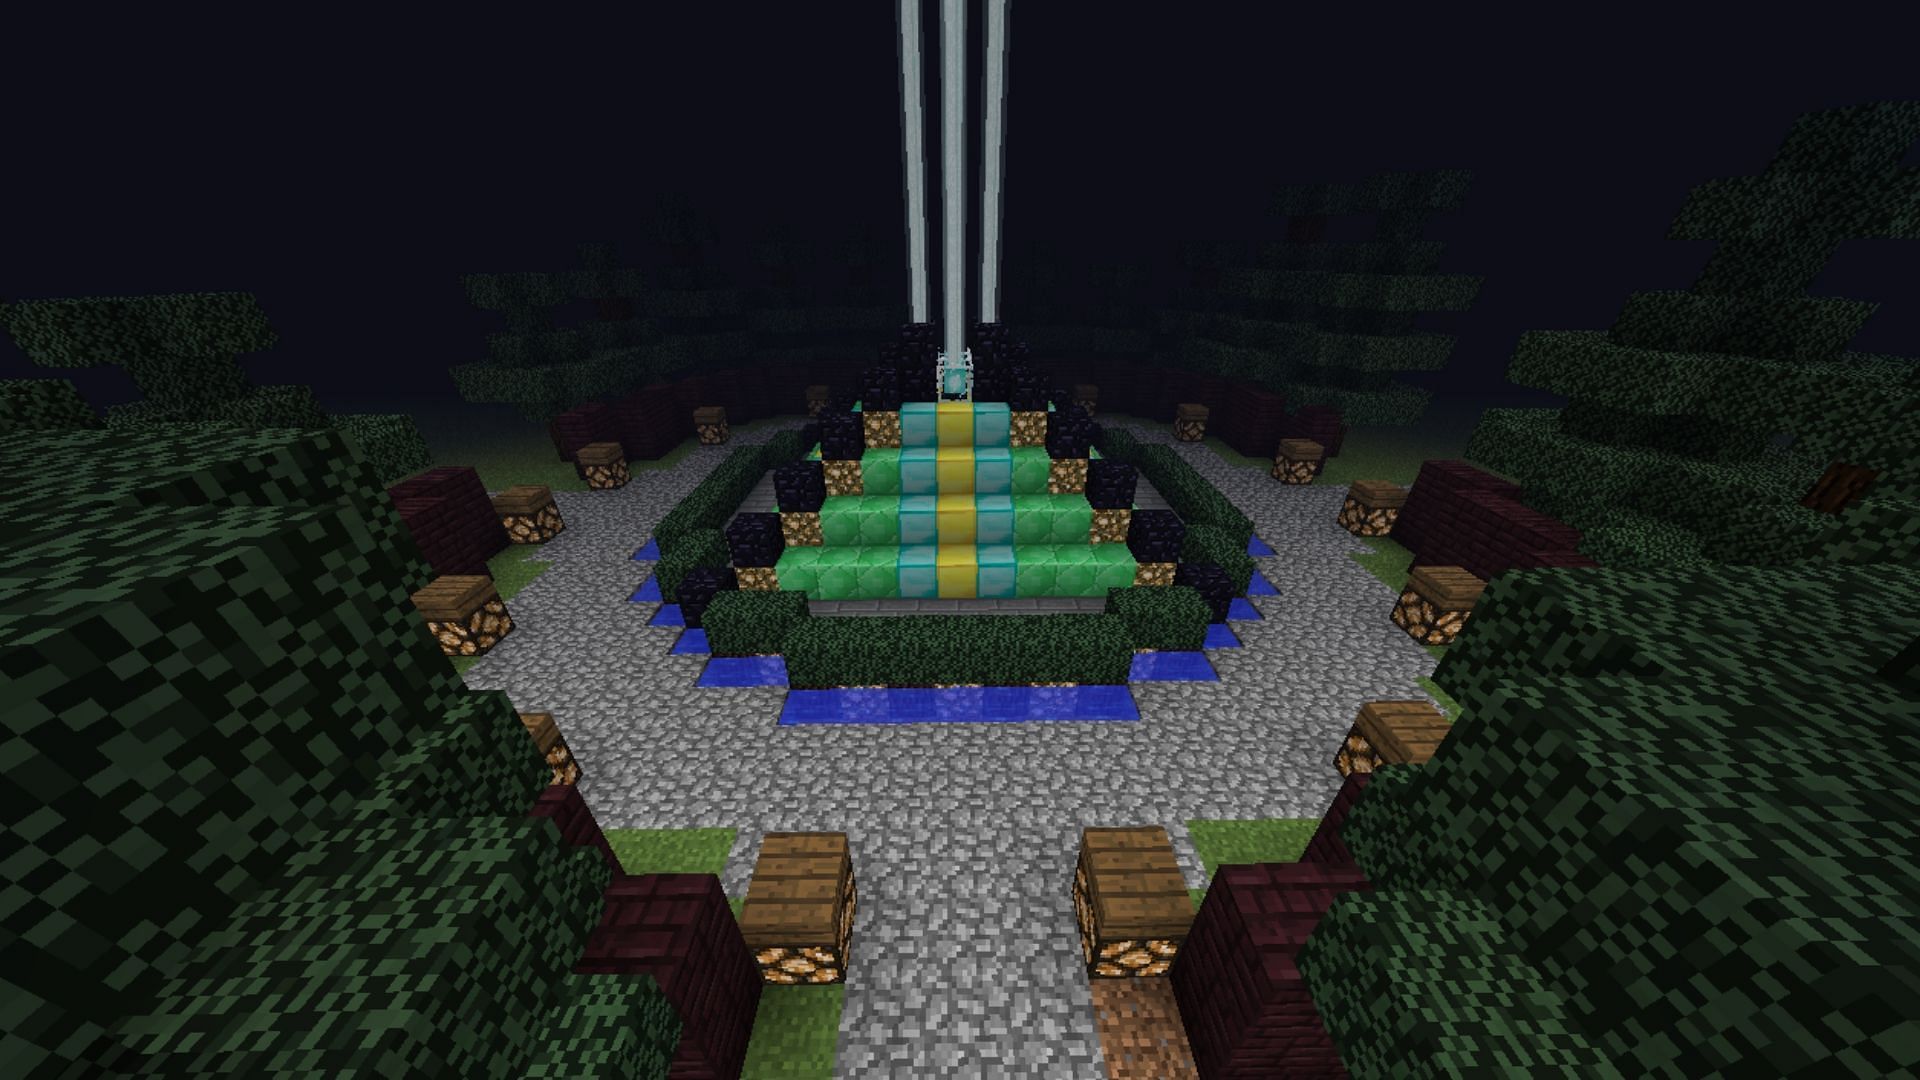 Players can also add different blocks around the beacon&#039;s pyramid for decoration in Minecraft (Image via Reddit)